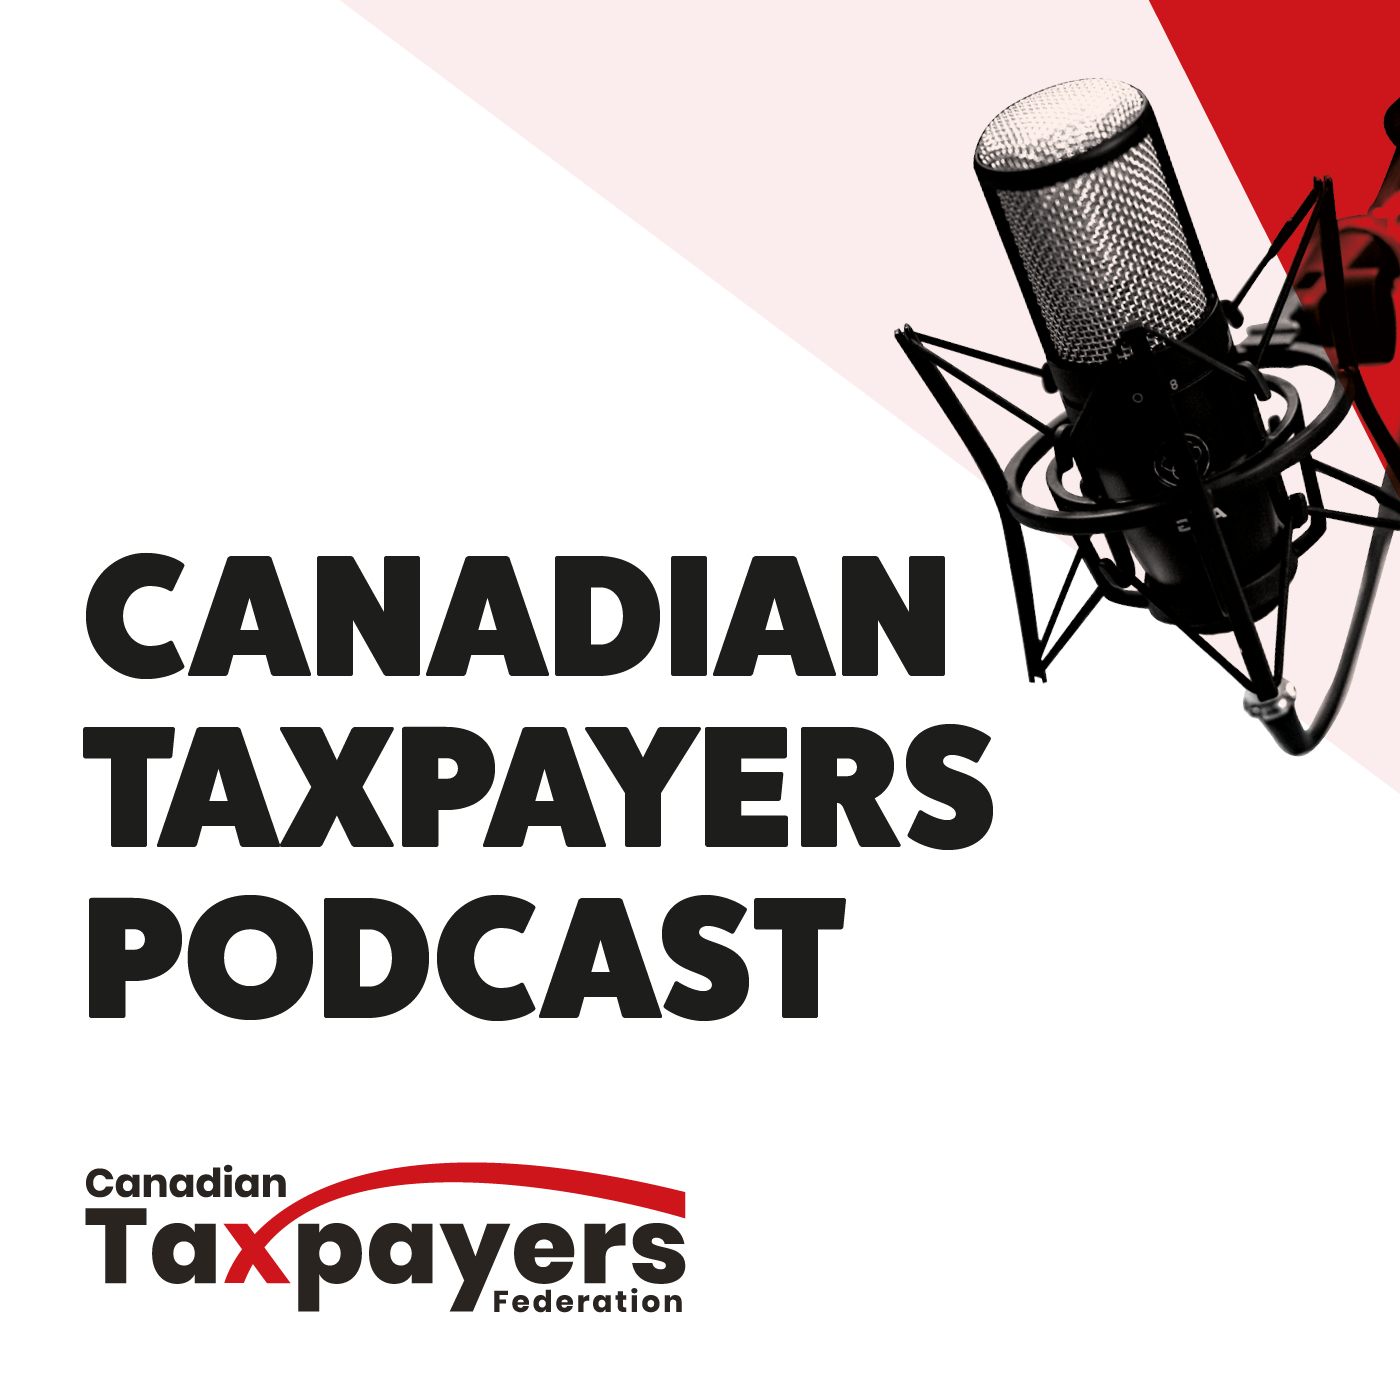 #4 VICTORY – 18% Mask Tariffs Dropped, Two Thirds of Canadians Want MPs to Cut Their Pay, Trudeau’s Gun Ban and Buyback, Corrupt Mayor Makes Off Like Bandit, and Former MP Michelle Simson Interview about MP Pay and Transparency